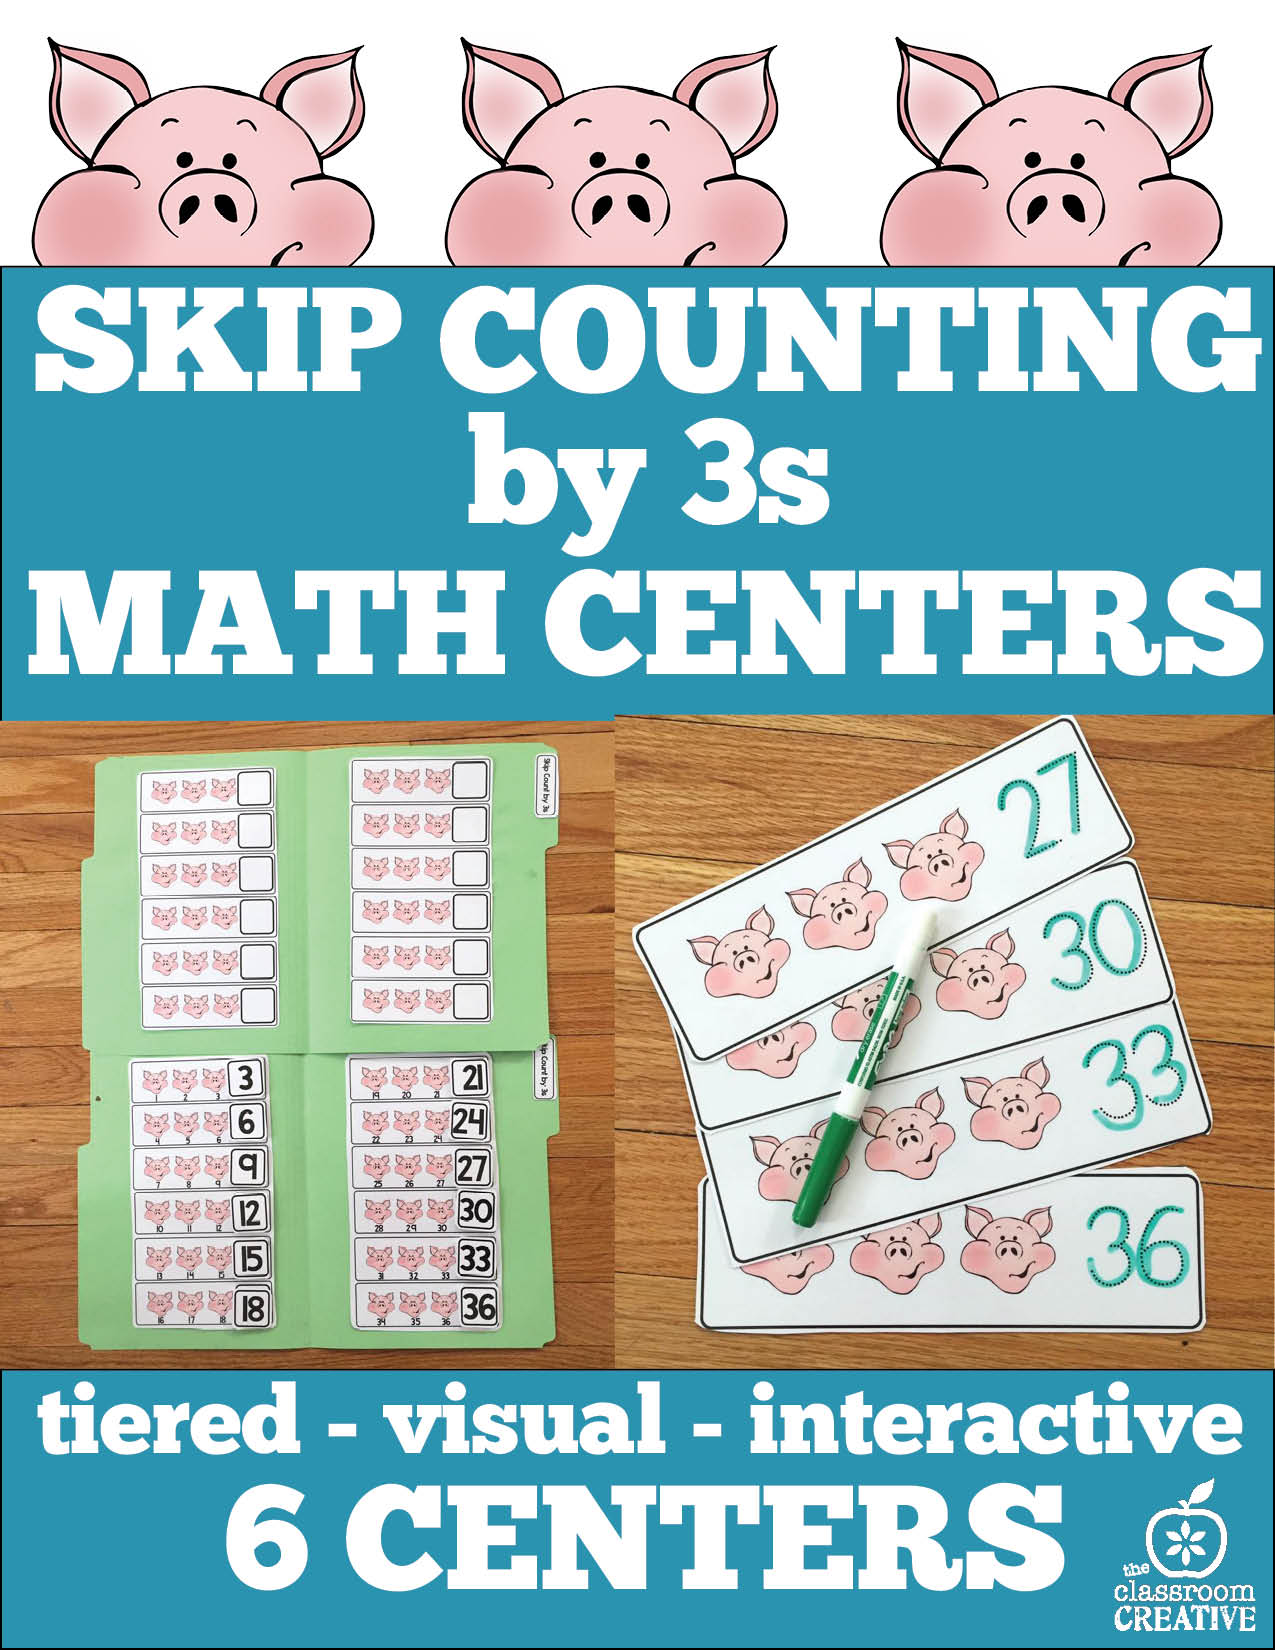 Ideas for Teaching Skip Counting